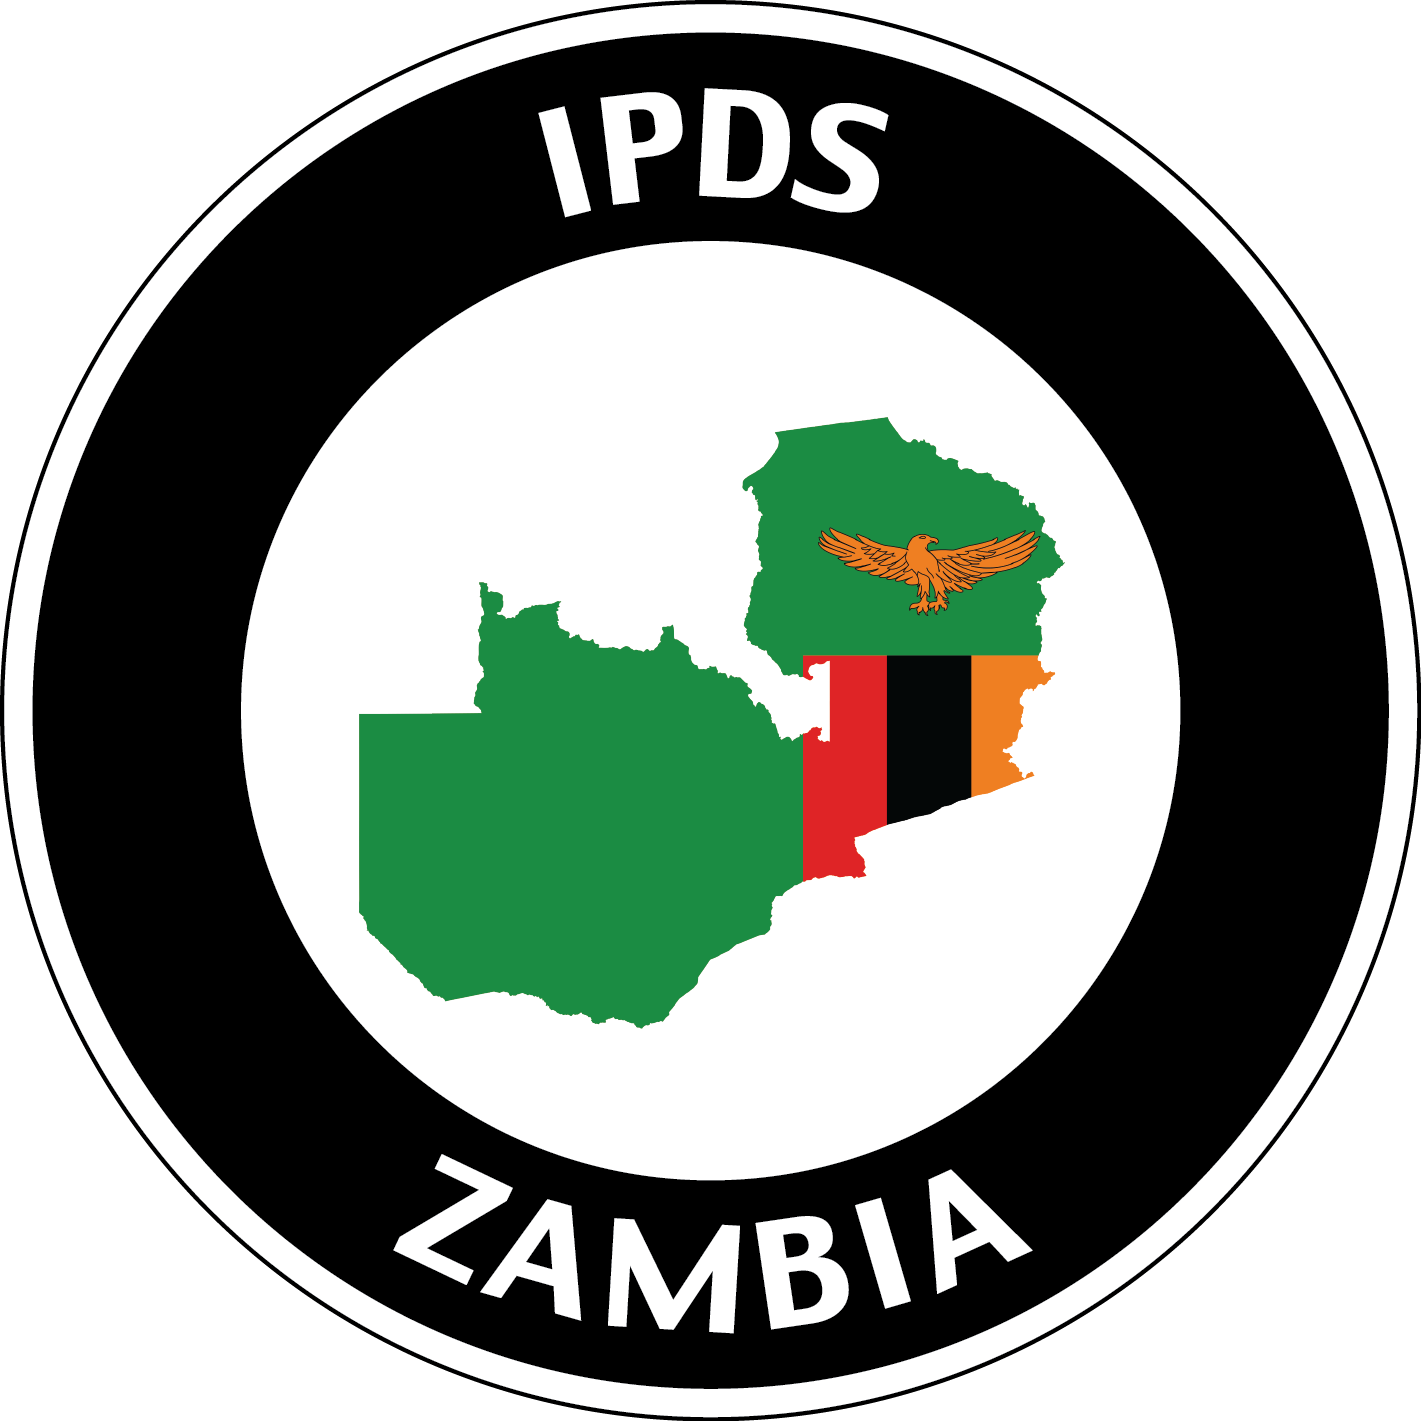 IPDS Zambia icon with country and flag